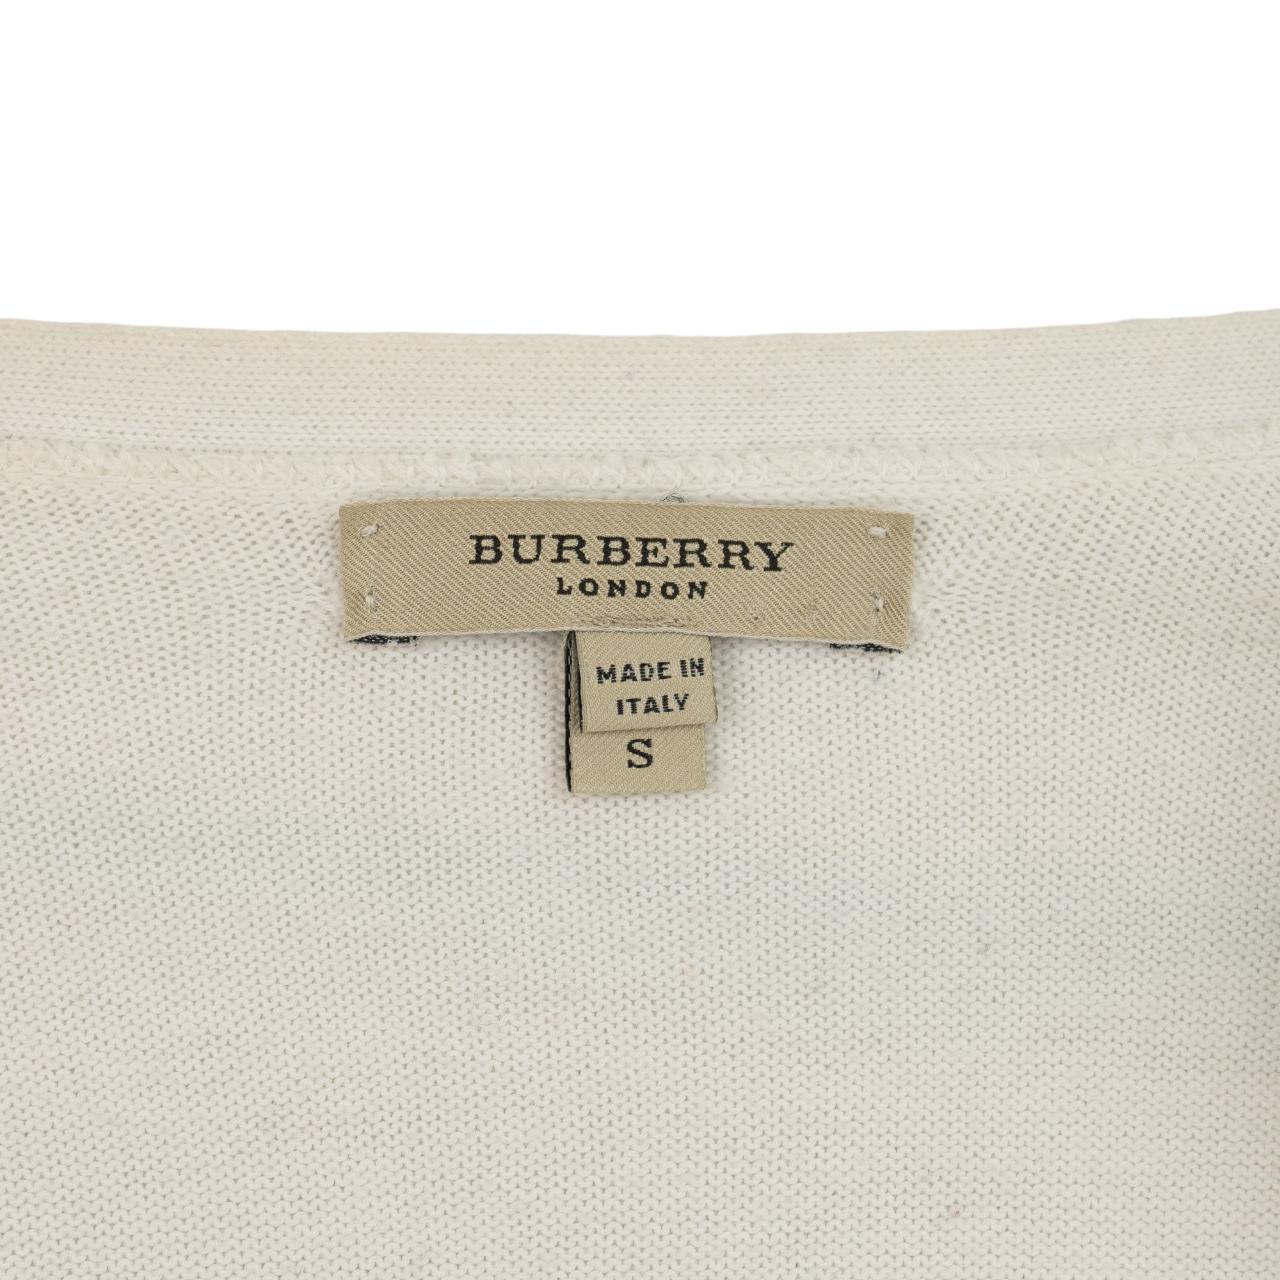 Vintage Burberry Knit Button Cardigan Woman’s Size S - Known Source